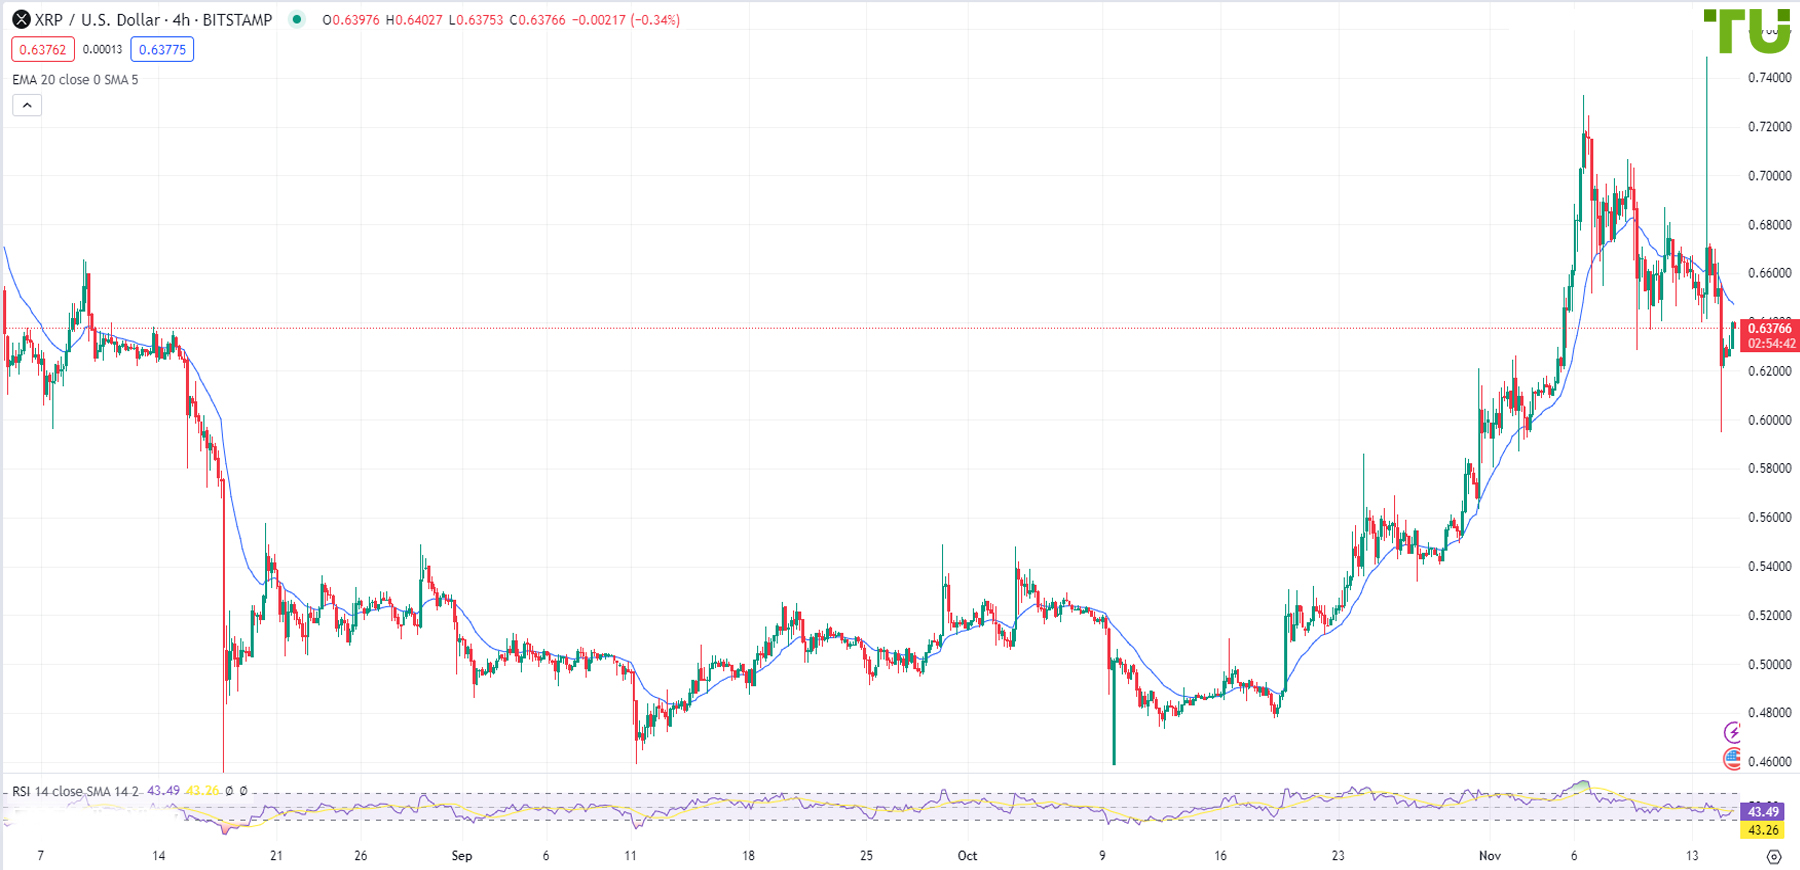 XRP/USD declines after trying to break through the highs